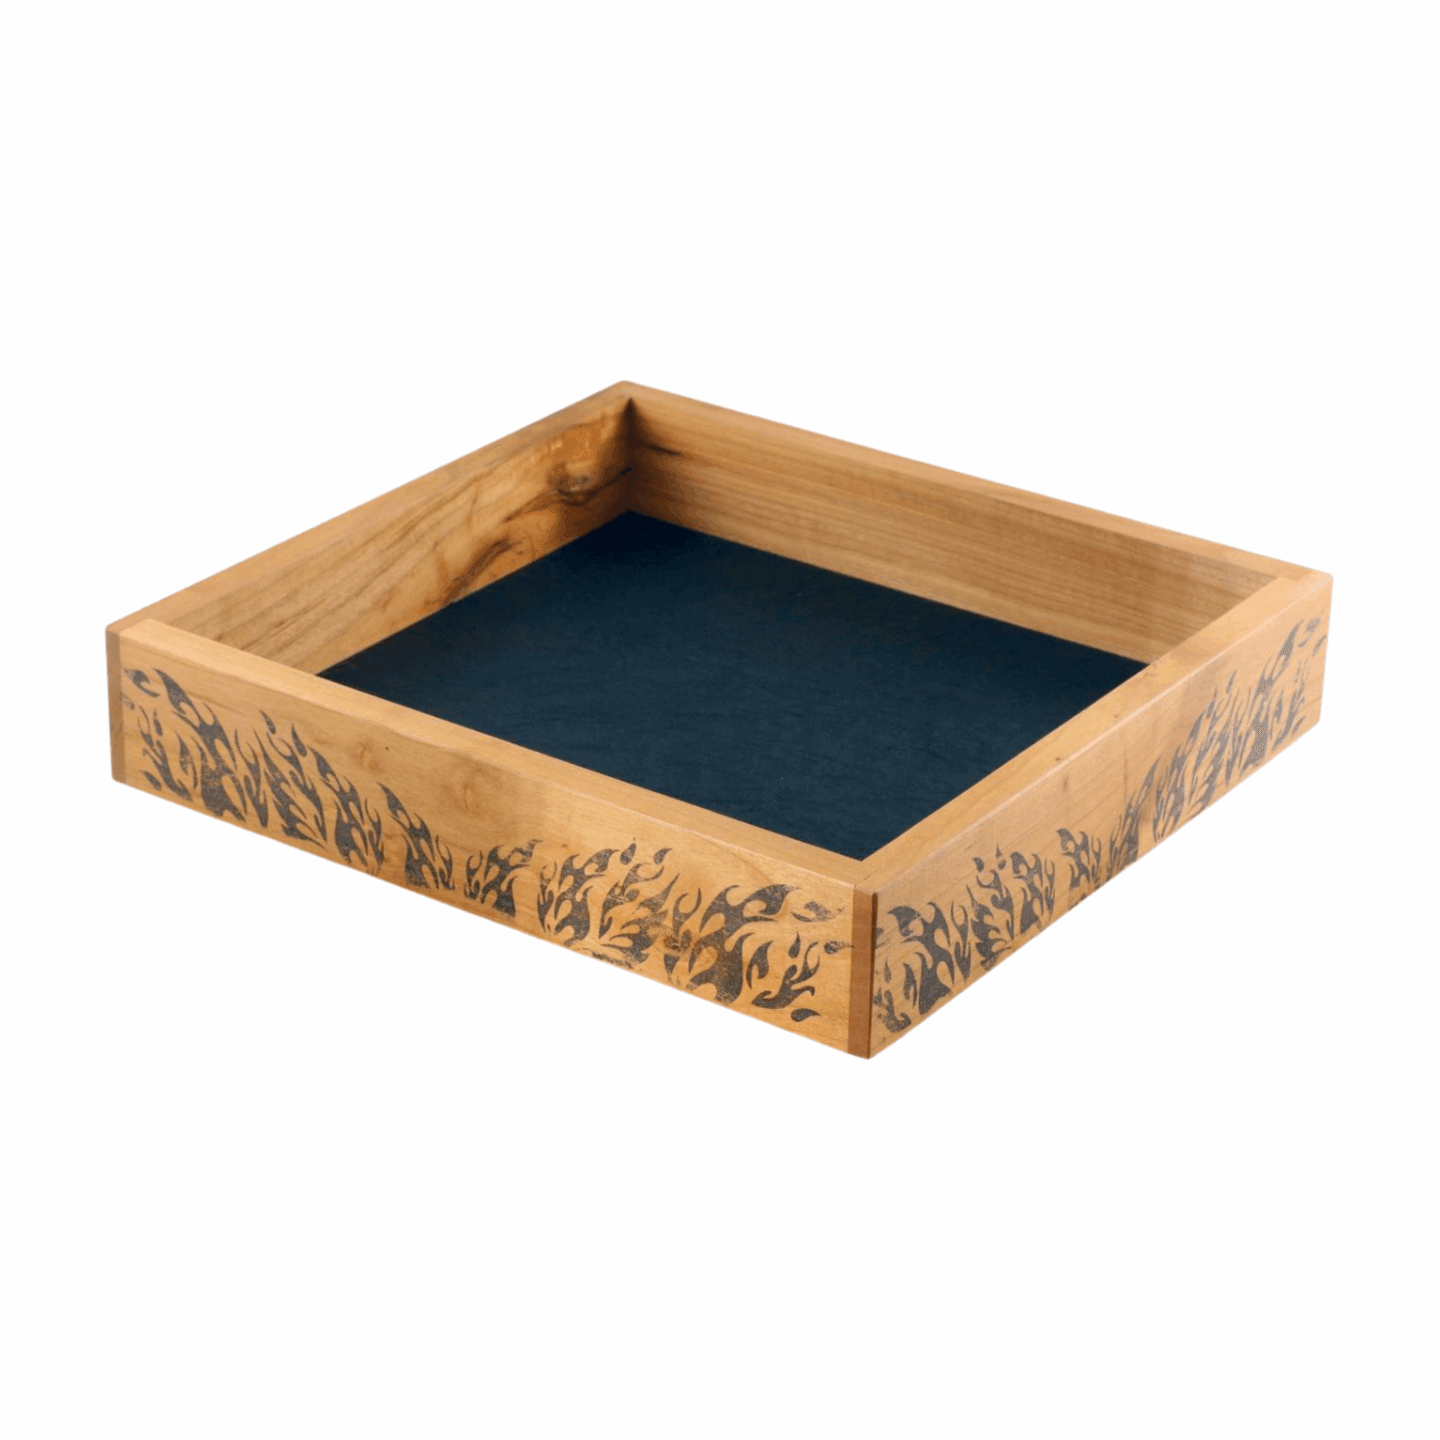 Large Cherry Wood Dice Tray with Flame Design for Tabletop Gaming - Dragon Armor Games